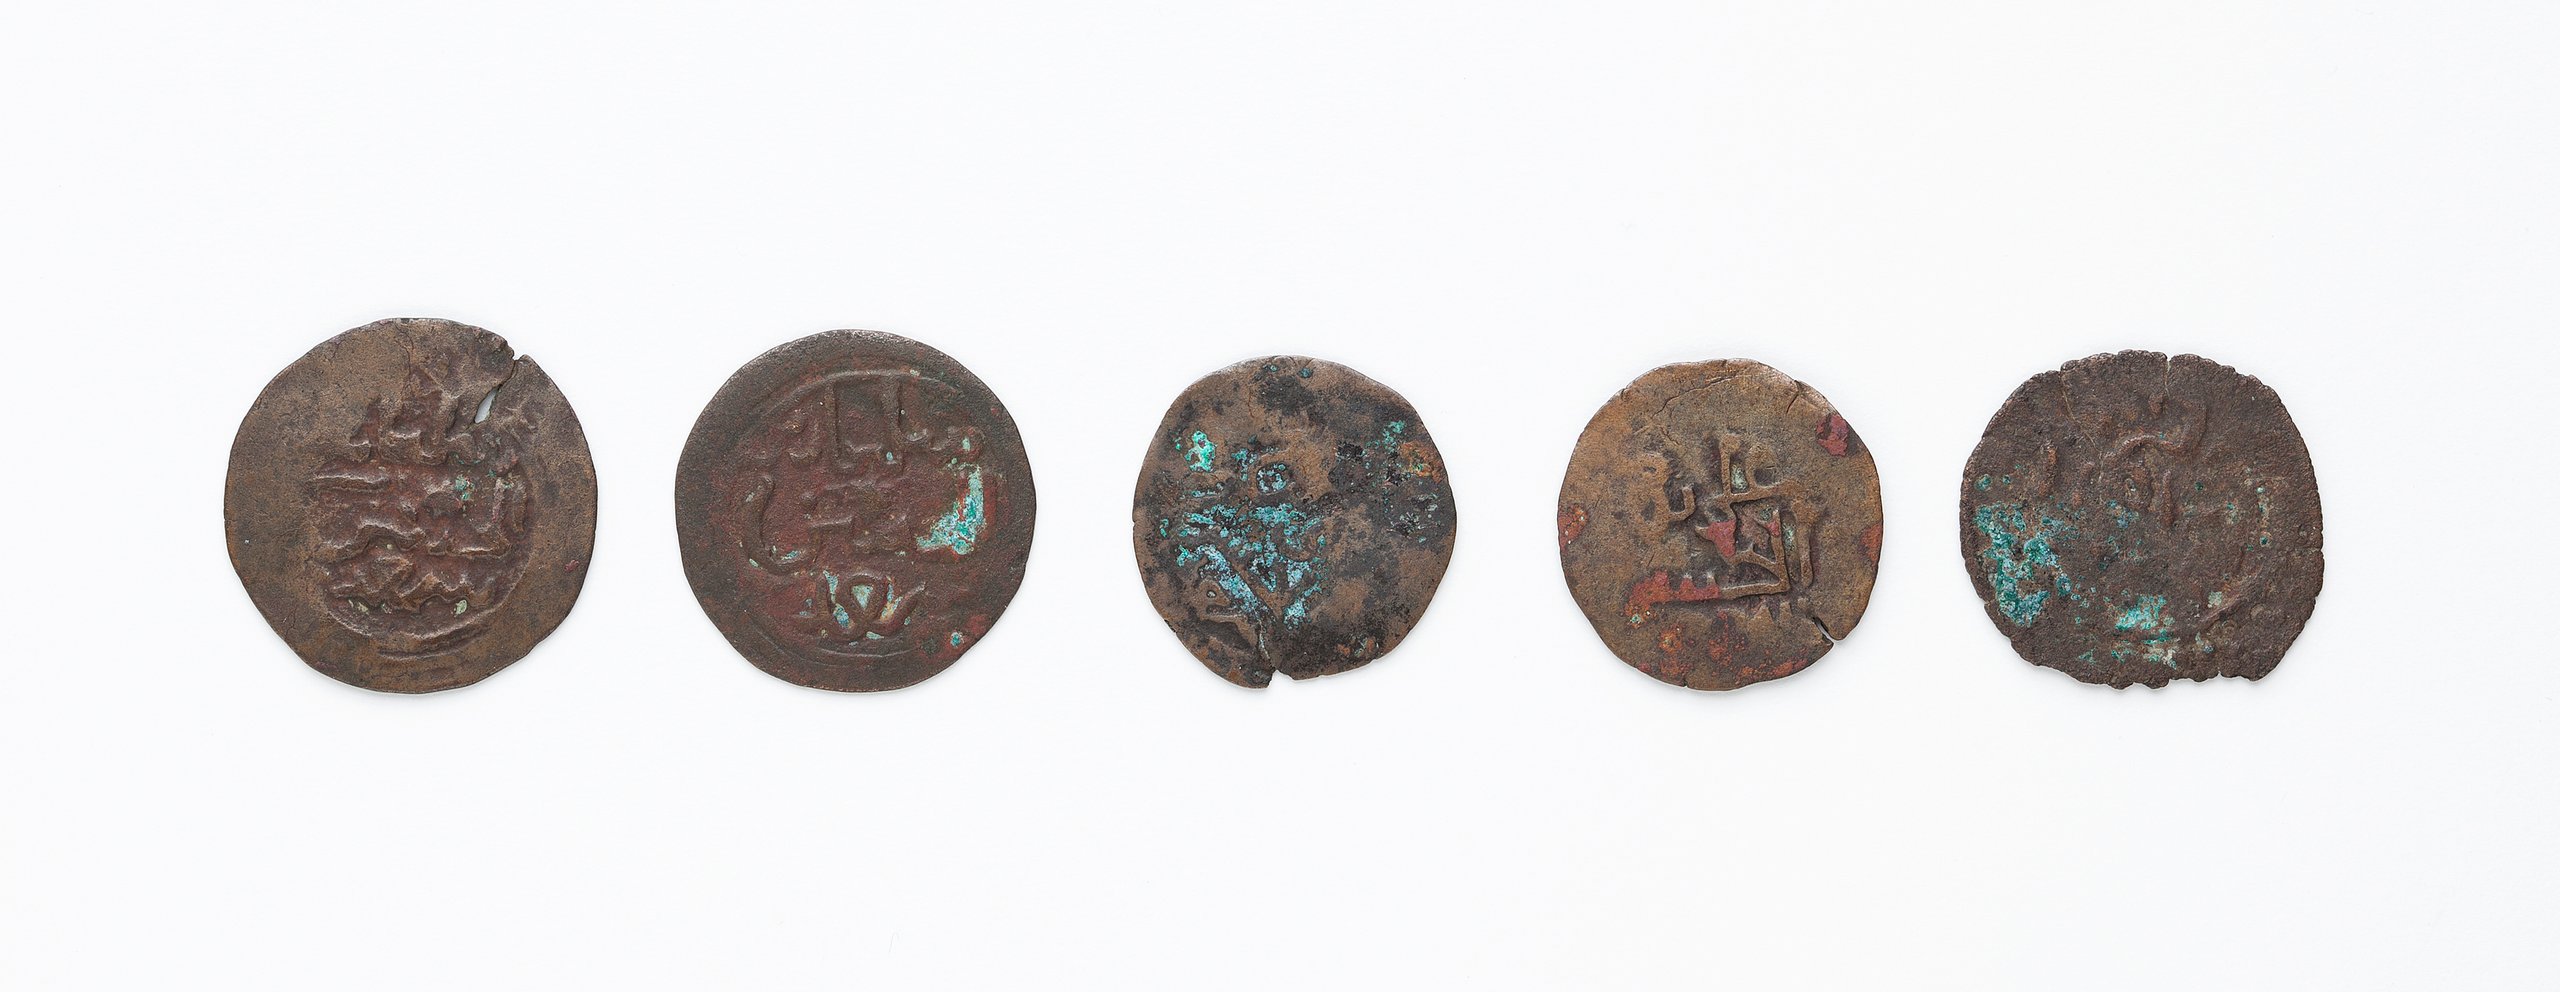 Collection of coins, photograph and documentation